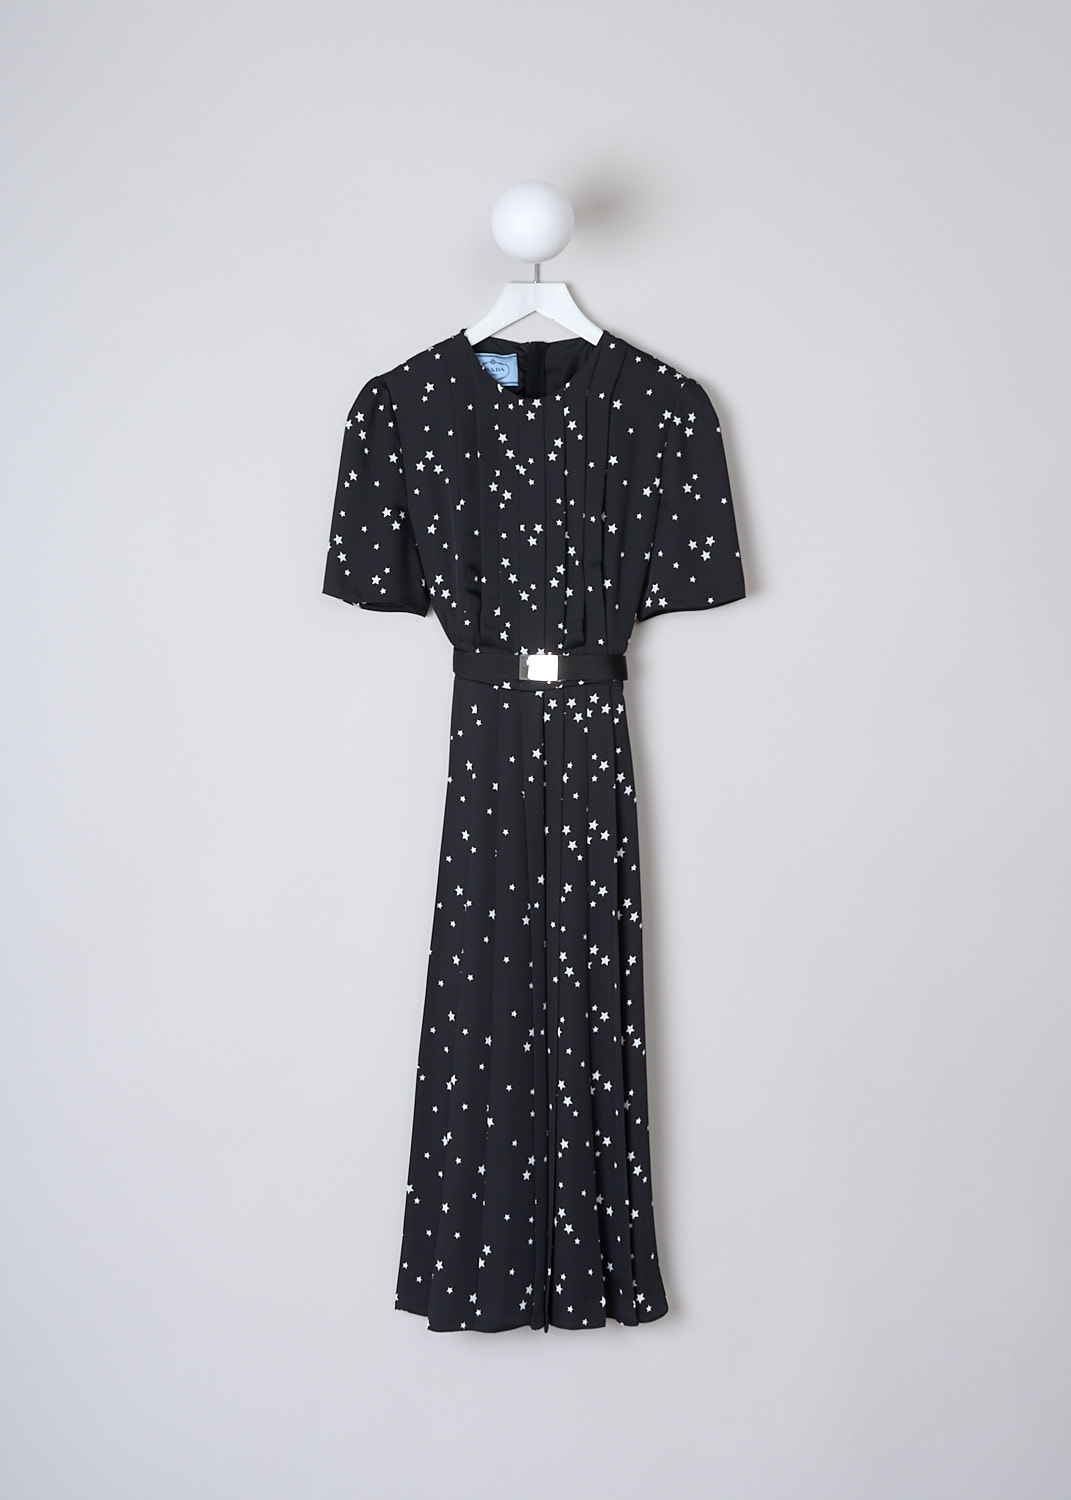 PRADA, BLACK MIDI DRESS WITH WHITE STAR PRINT, TWILL_FLUIDO_ST_P3D13H_1YH8_F057Z_NERO_AVORIO, Black, White, Print, Front, This black dress with a white all-over star print has a high round neckline and short sleeves. The dress has a knife-pleated bodice and is divided from the skirt through a black cavas belt with a rectangular silver-tone belt buckle with the brands logo on it. The dress has a flared pleated midi skirt. In the back, a concealed centre zip functions as the closure.   
